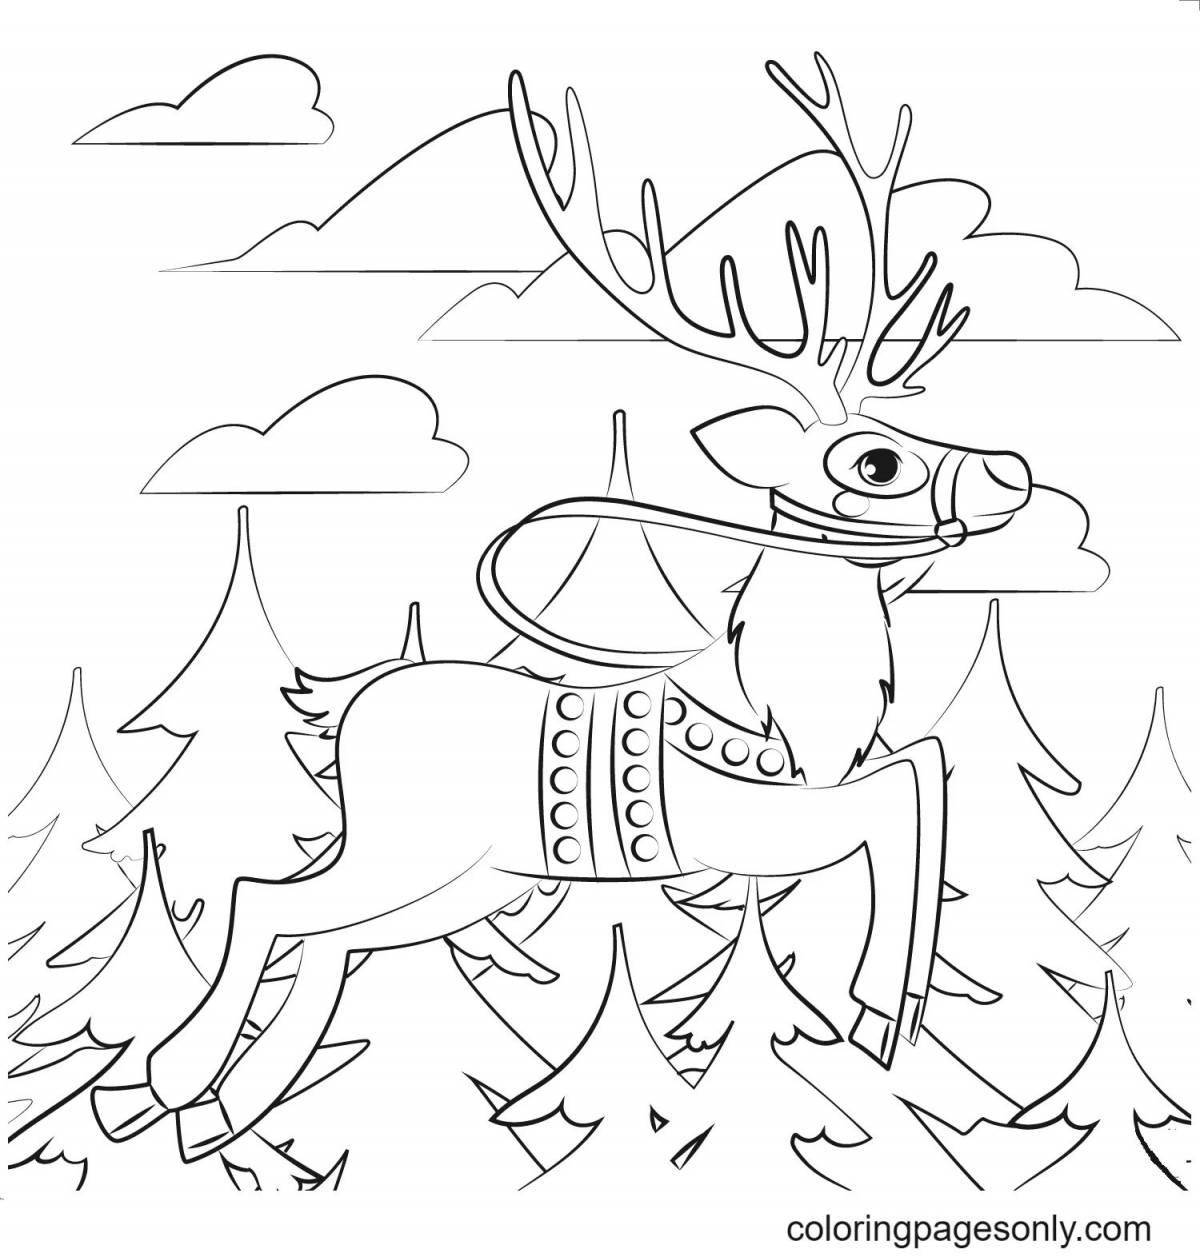 Coloring book witty reindeer